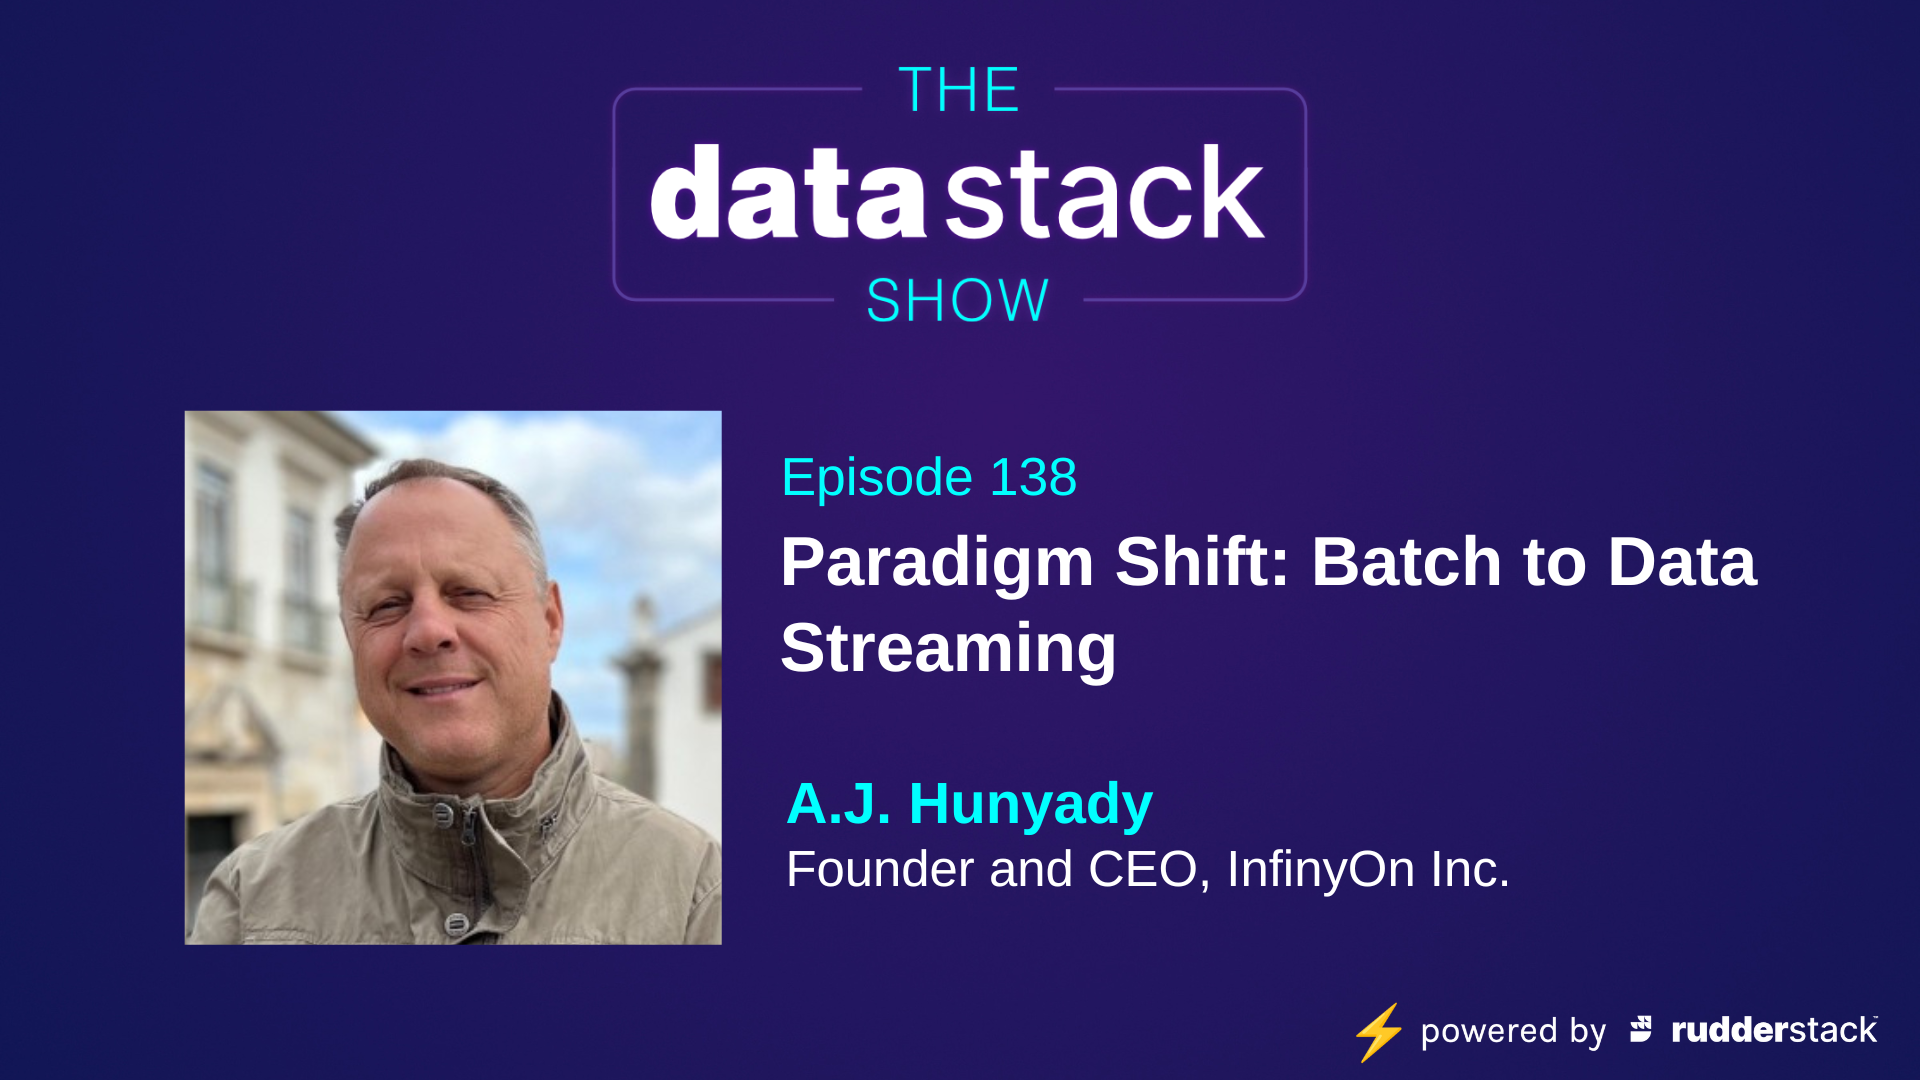 The DataStack Show, Episode 138